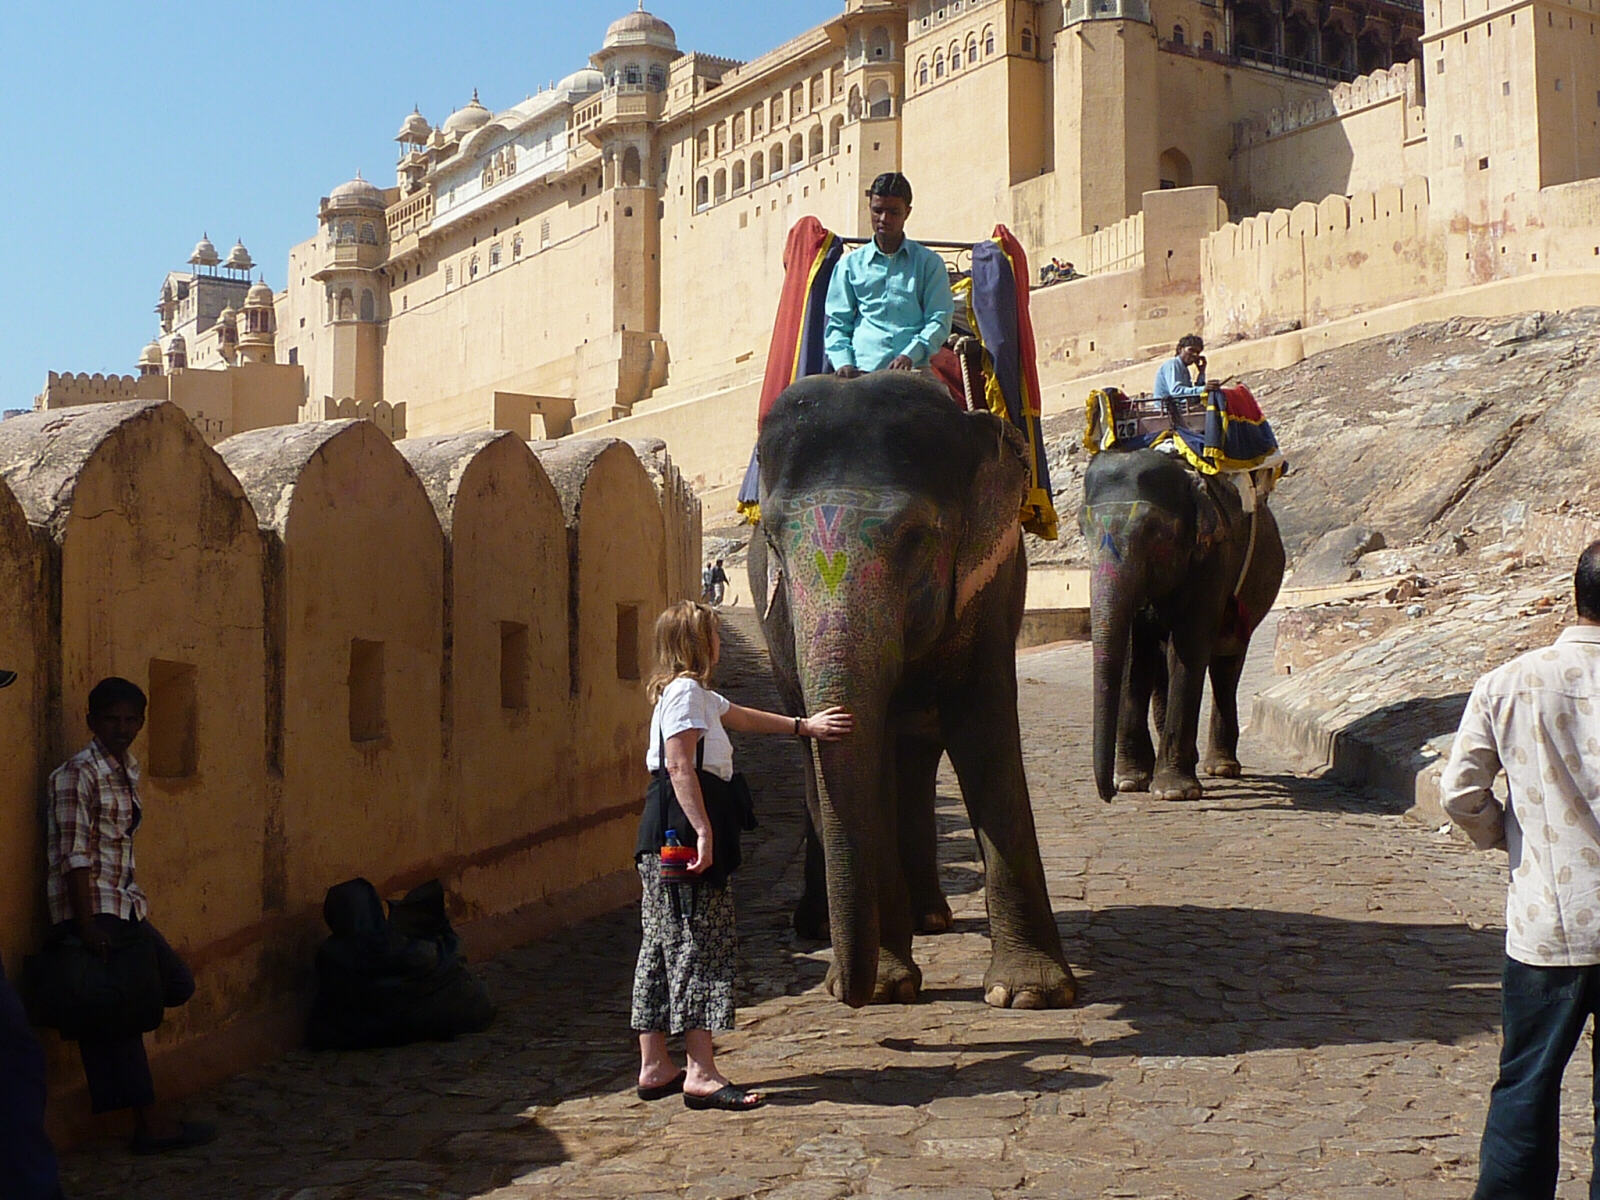 Elephant transport to Amber palace in Rajasthan, India